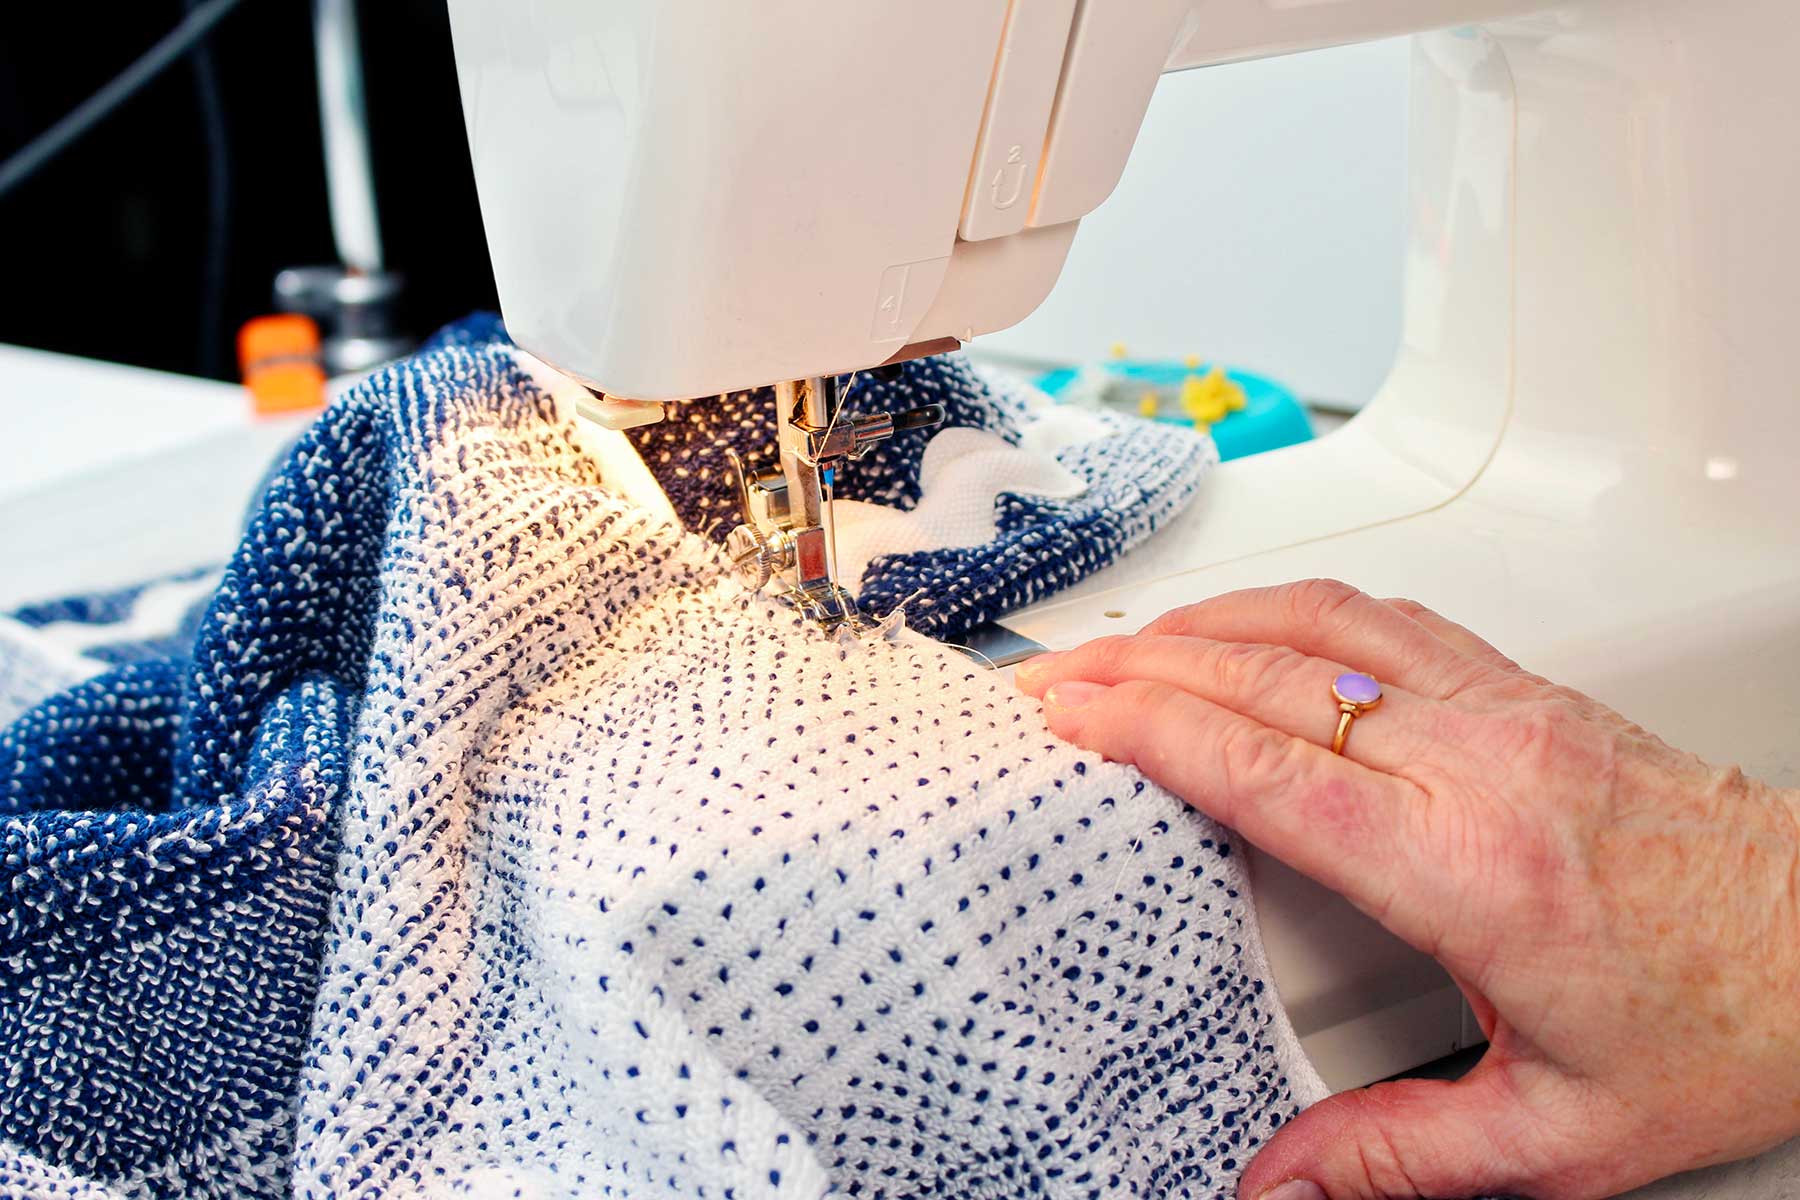 Hand sewing hood to towel with sewing machine.